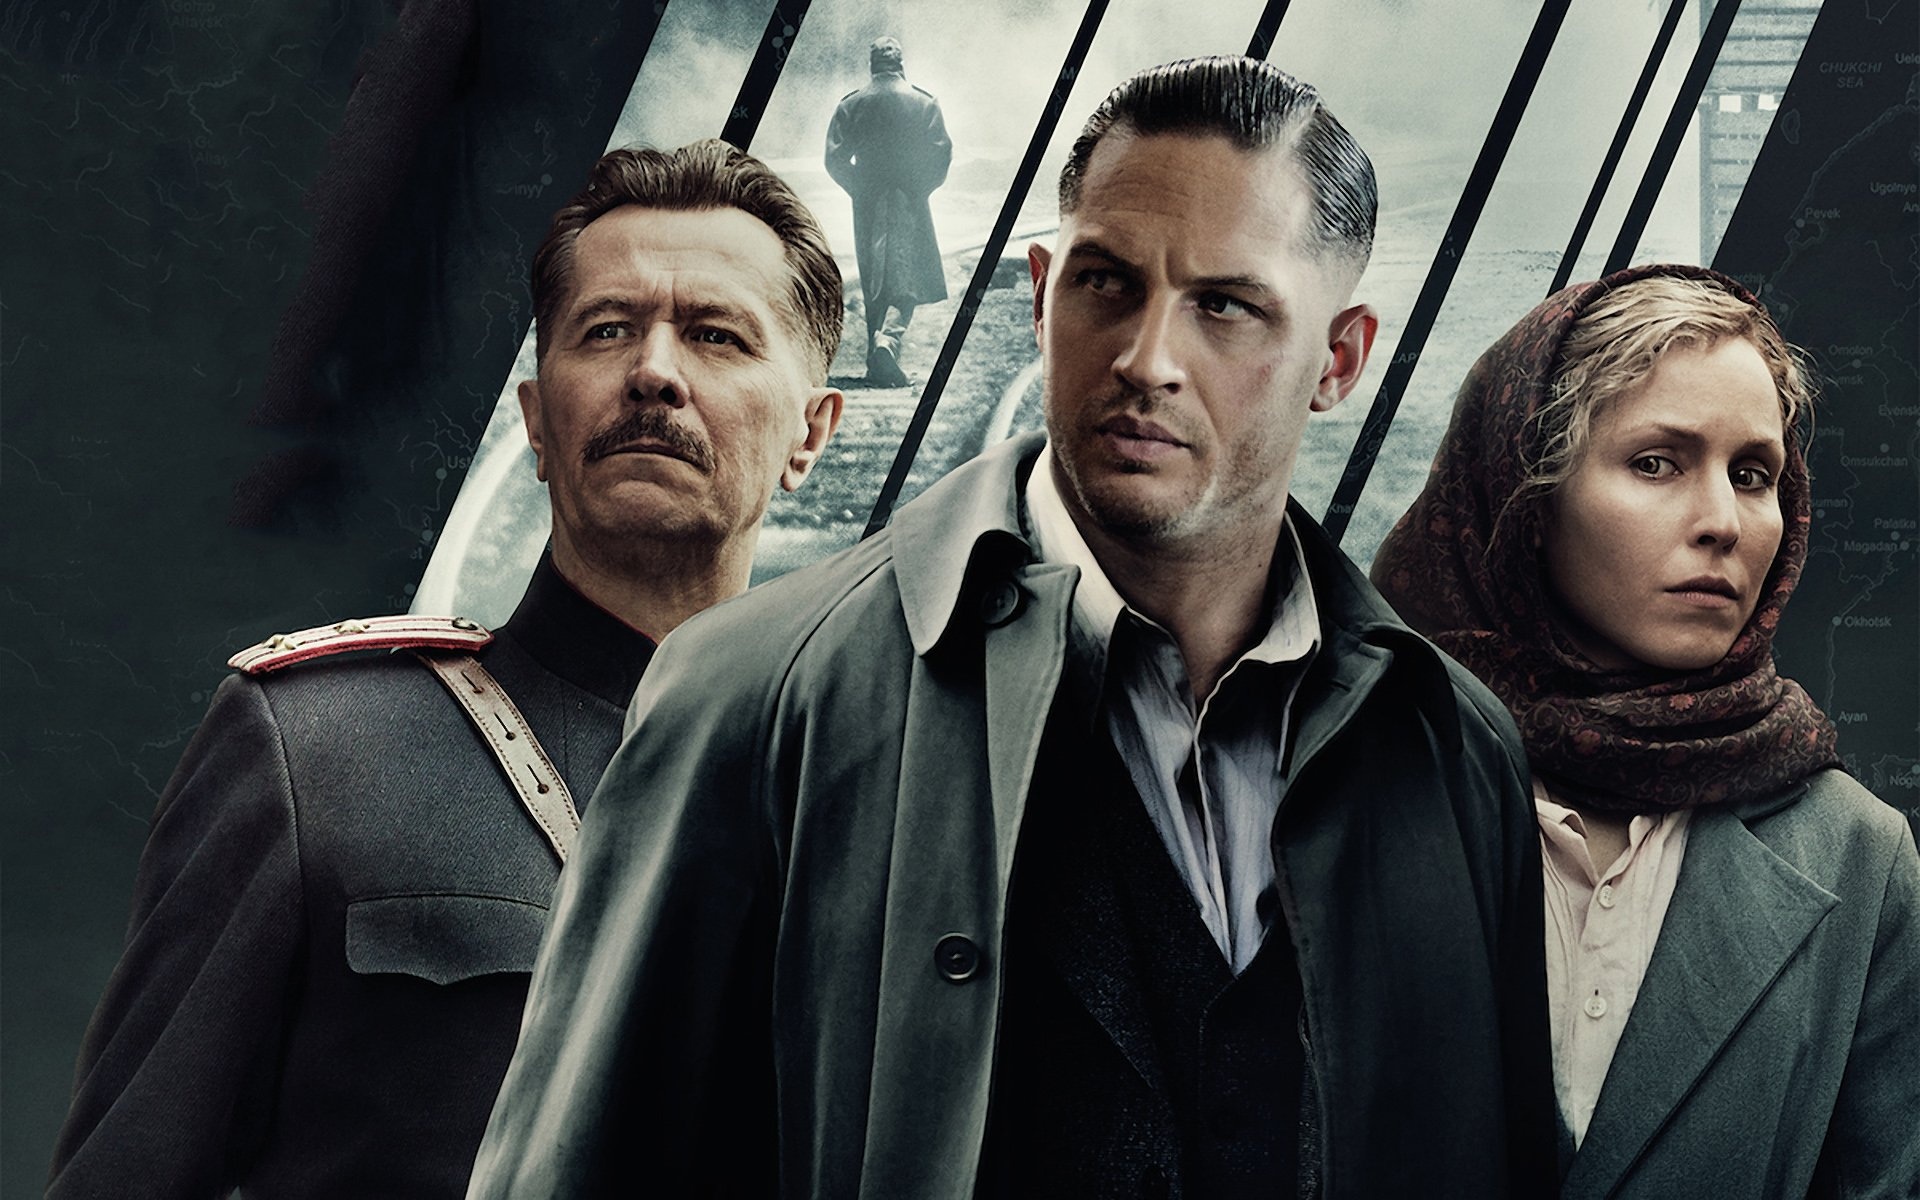 Gary Oldman, Child 44 movie, HD wallpapers, Background images, 1920x1200 HD Desktop